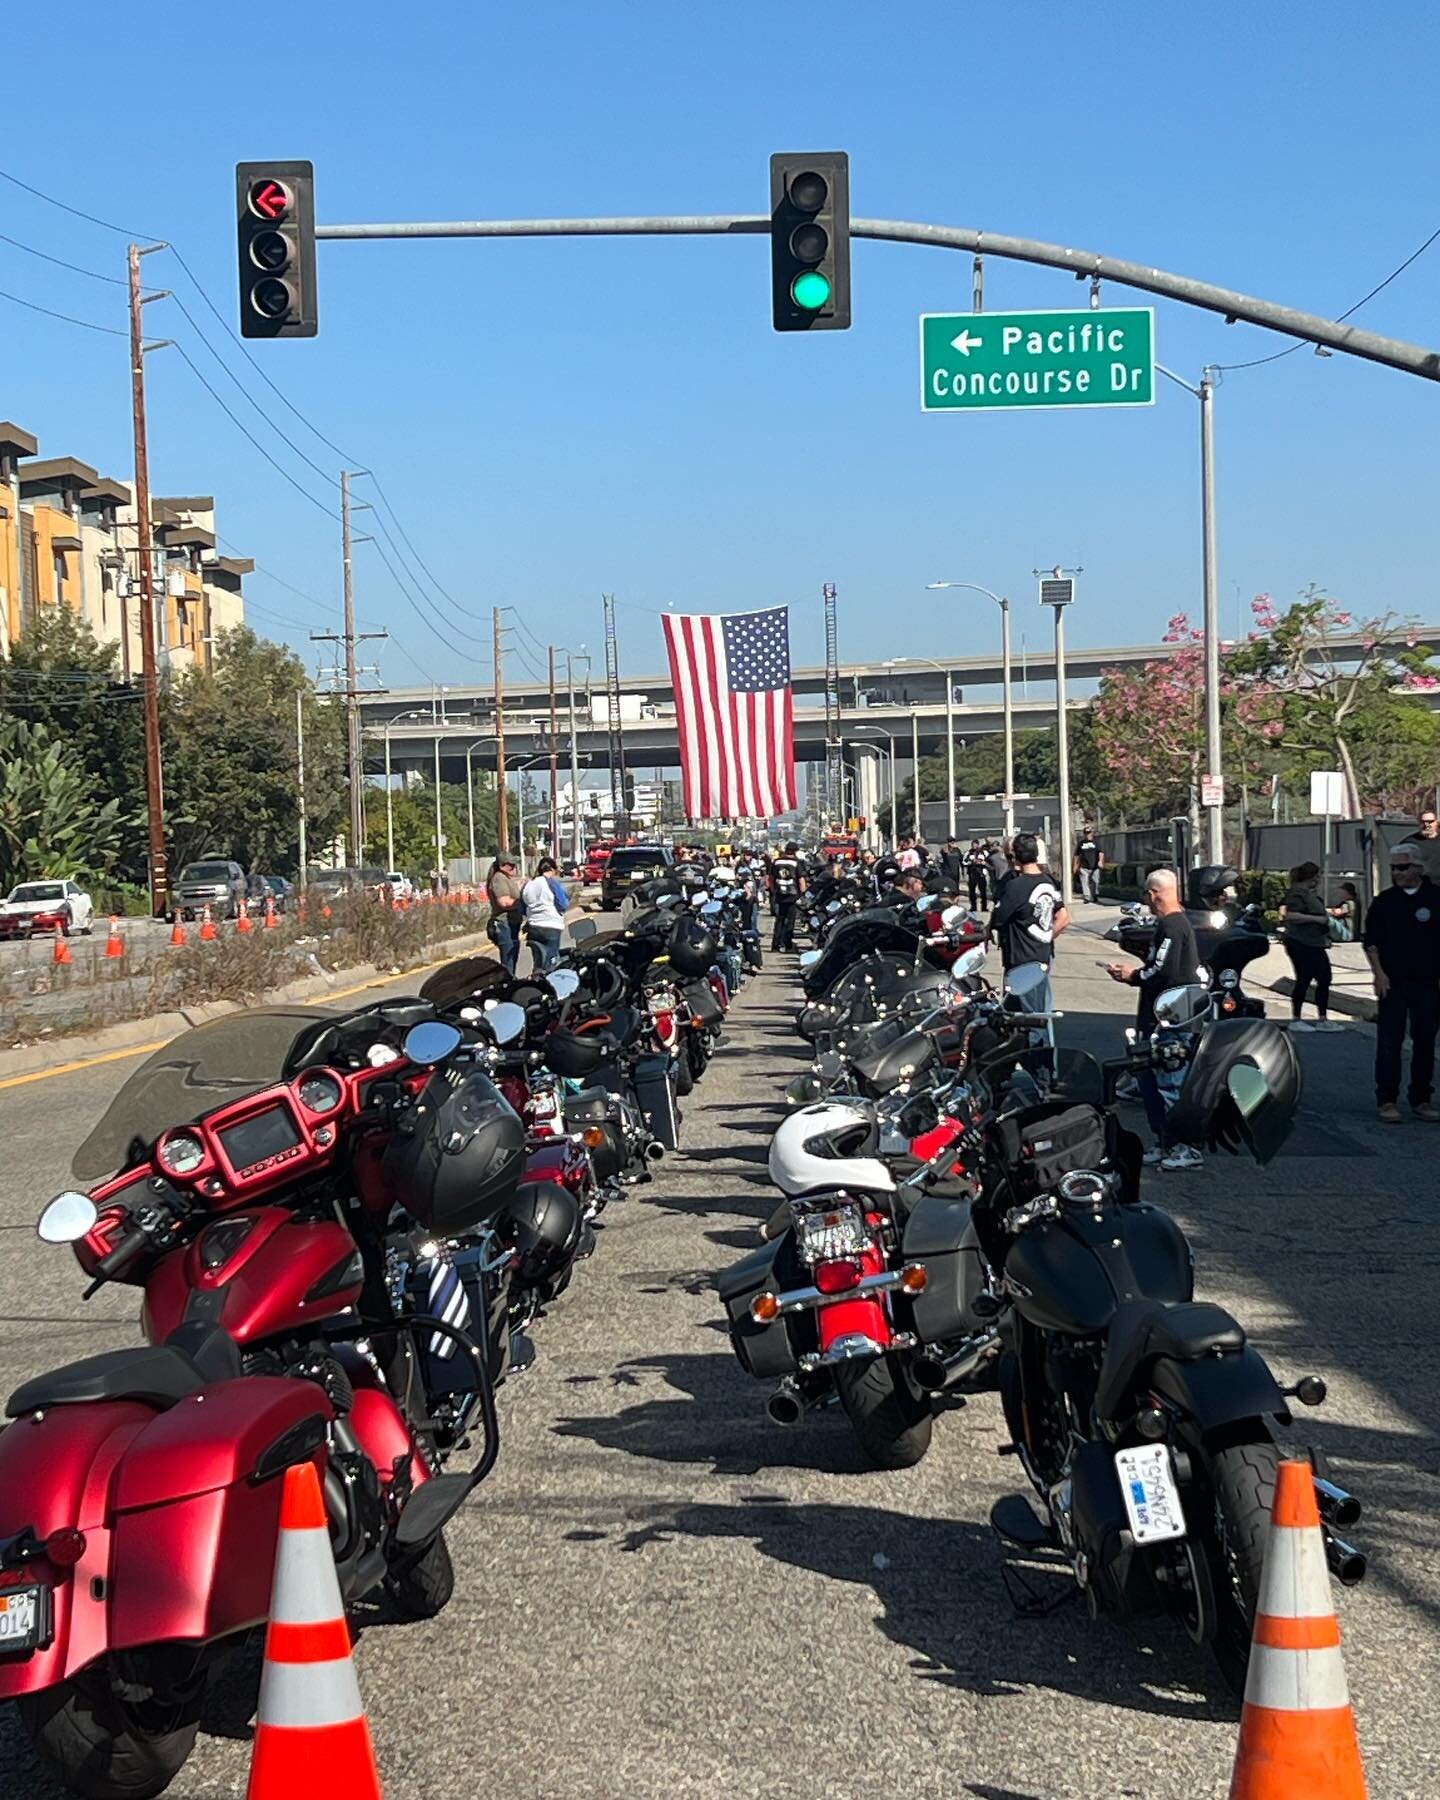 Thank you everyone who came out and made this an incredible 10-33 benefit ride! Shout out to all of our sponsors and donors who made this all possible. See you guys at the next one!